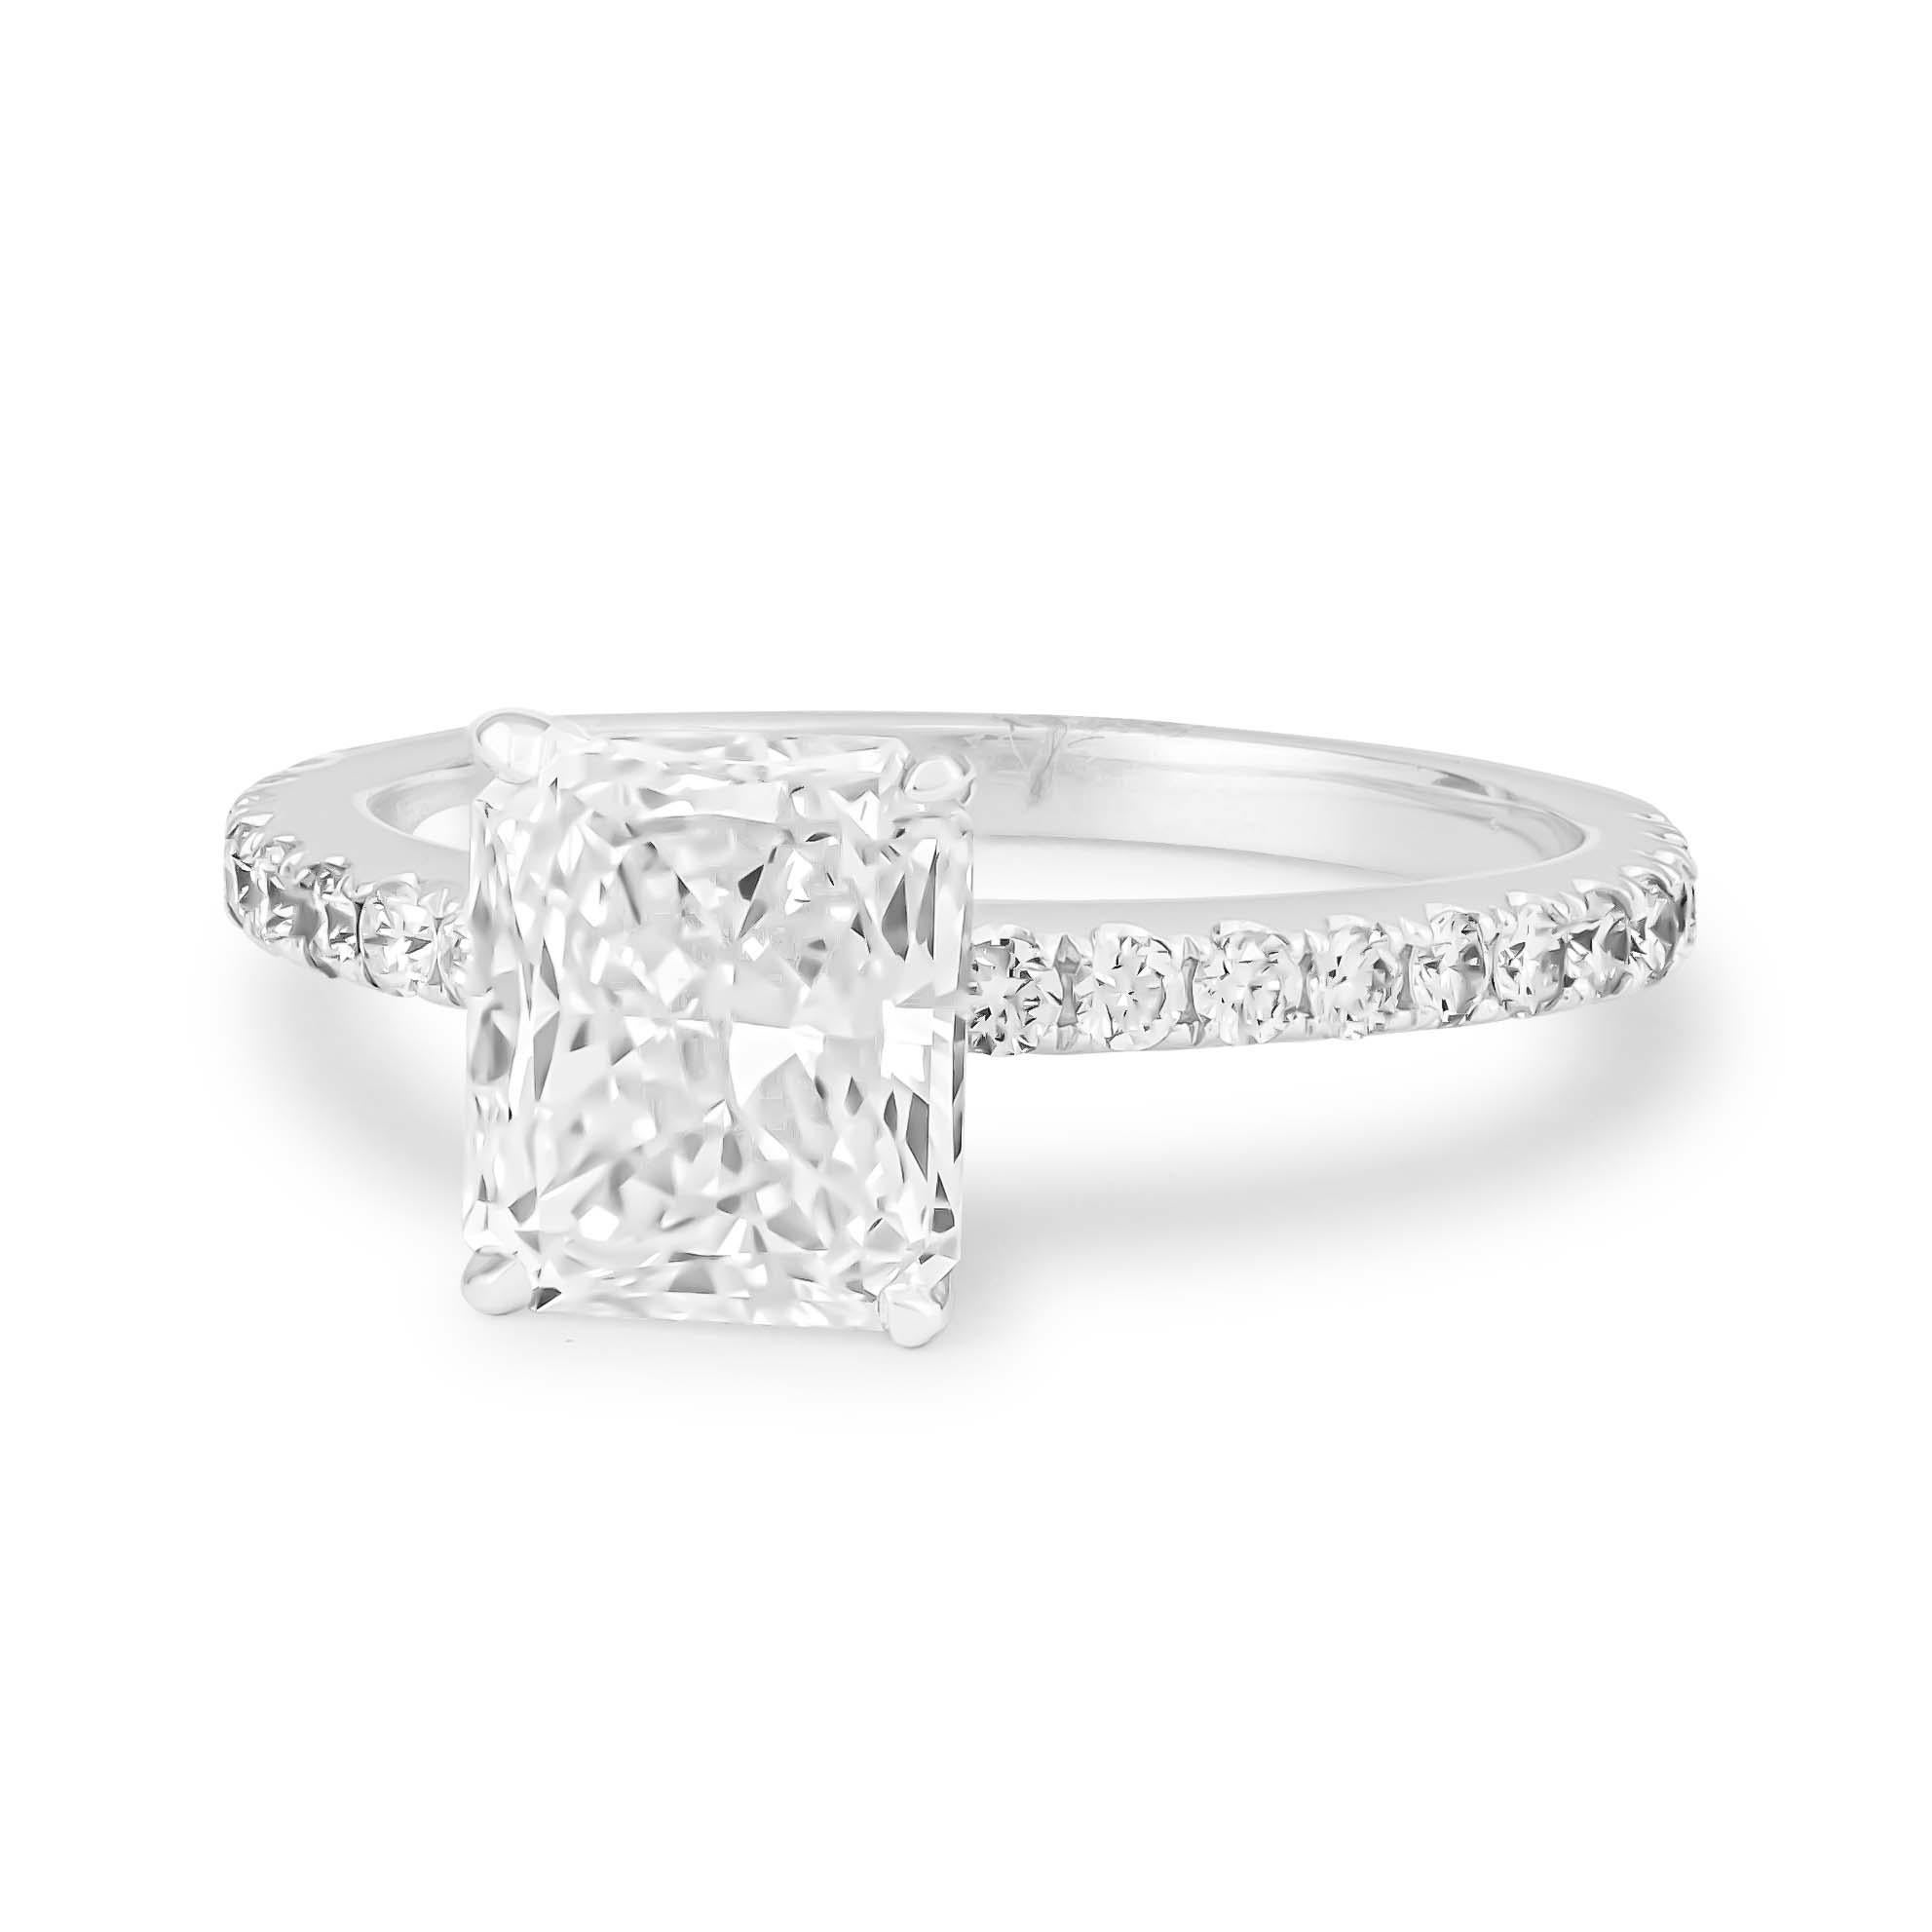 Stunning EGL certified 1.54 carat radiant cut diamond engagement ring that has been beautifully set in a 4-prong, 18K white gold basket head. The center diamond is adorned by 0.33 carats of fine round brilliant cut diamonds that are perfectly set